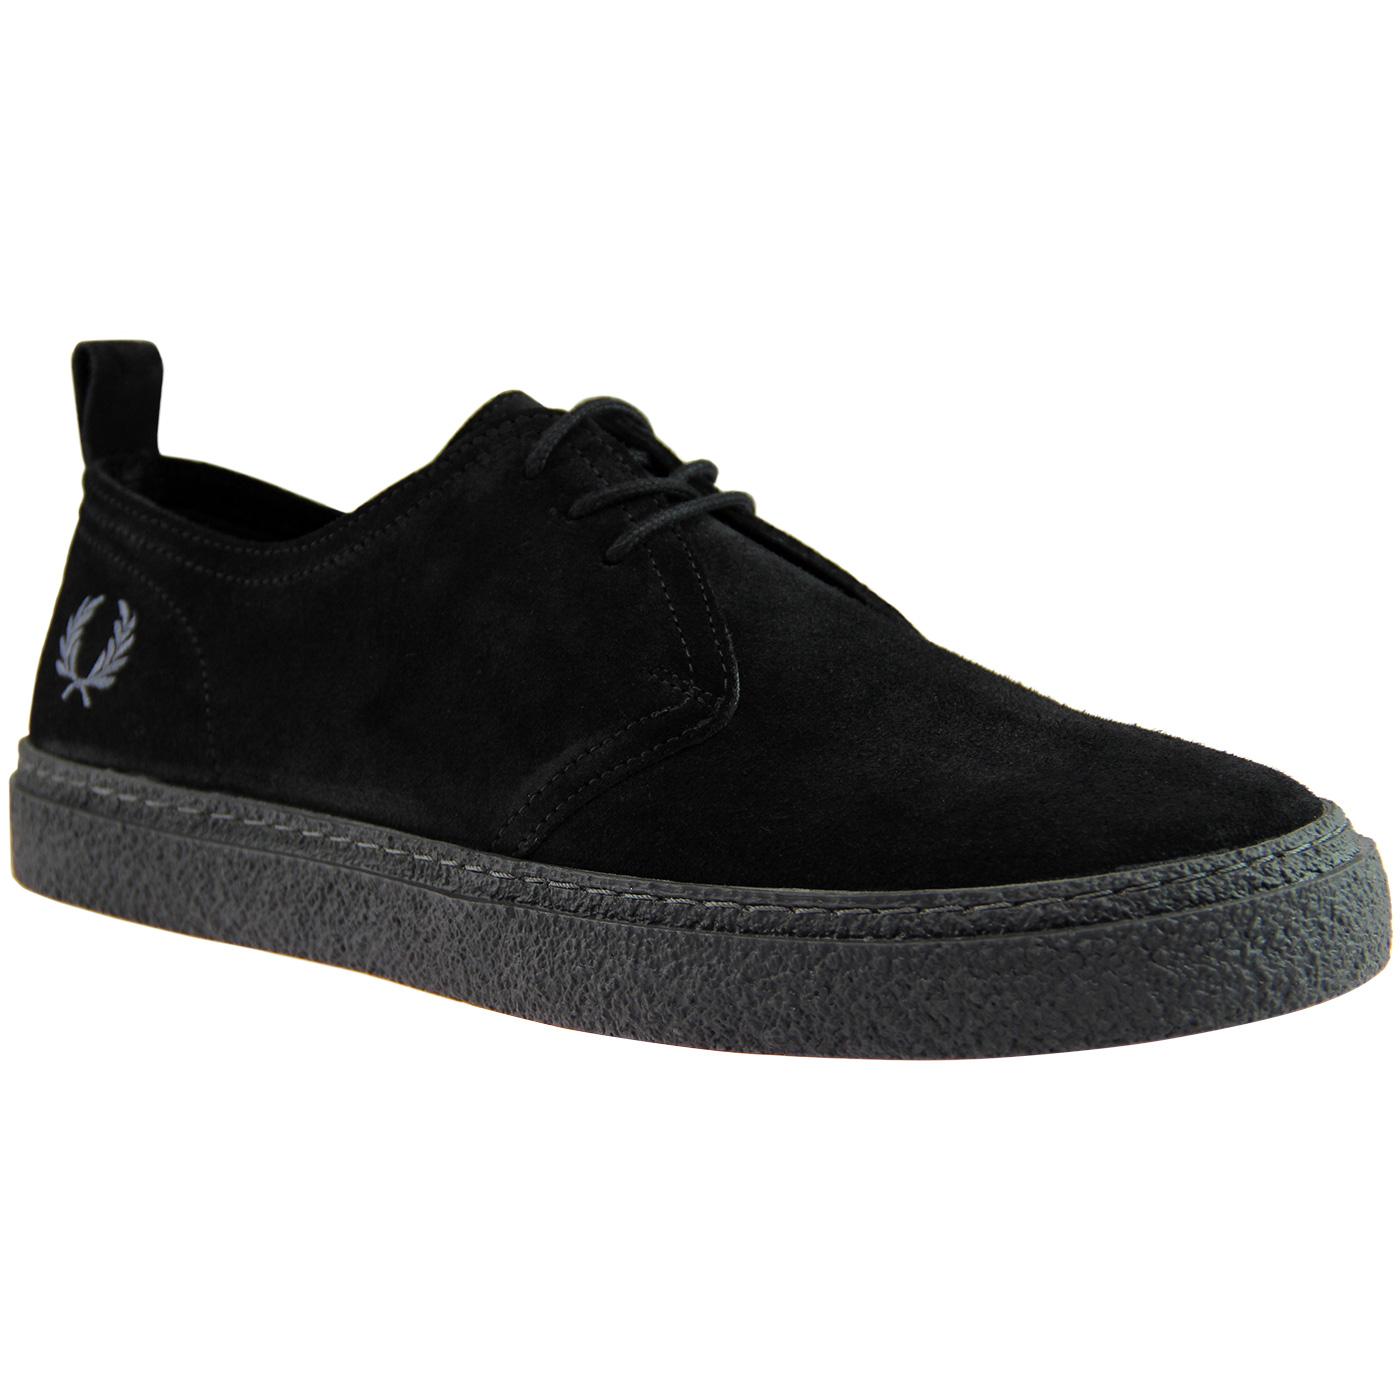 FRED PERRY 'Linden' Retro Mod Suede 